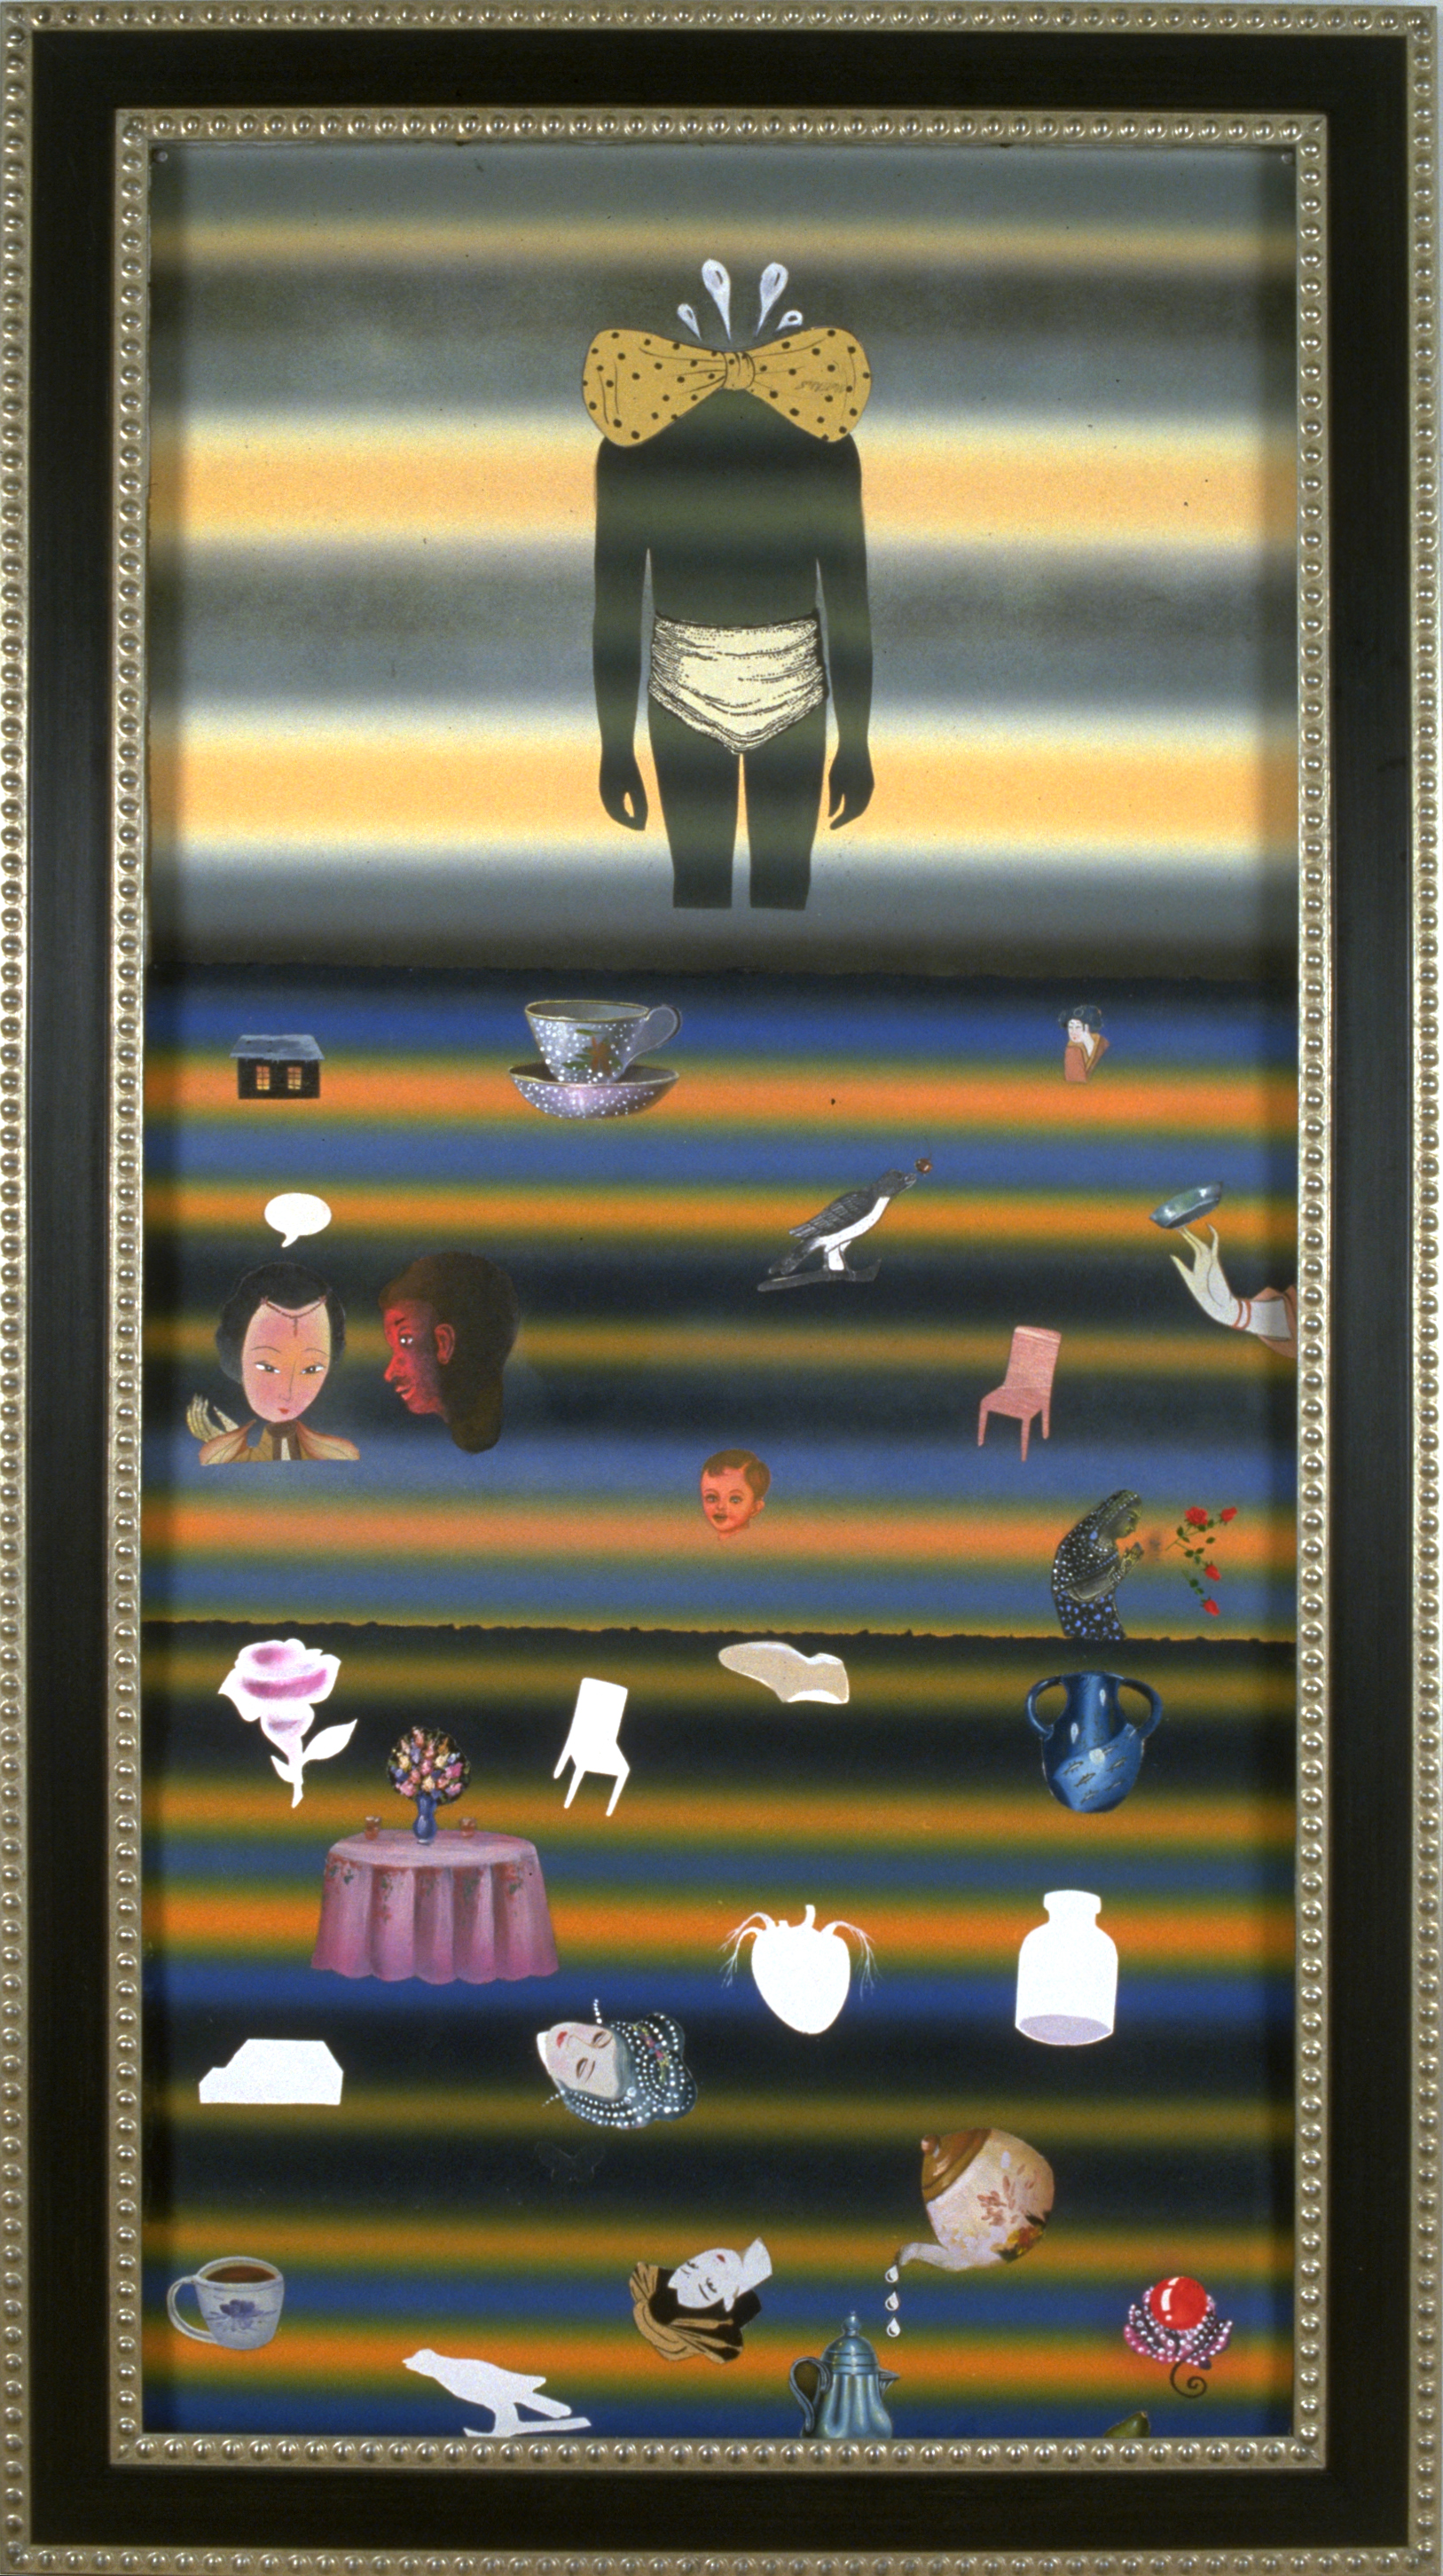 Muteness Caused by Skepticism, 60" × 38", mixed media on paper, 2001